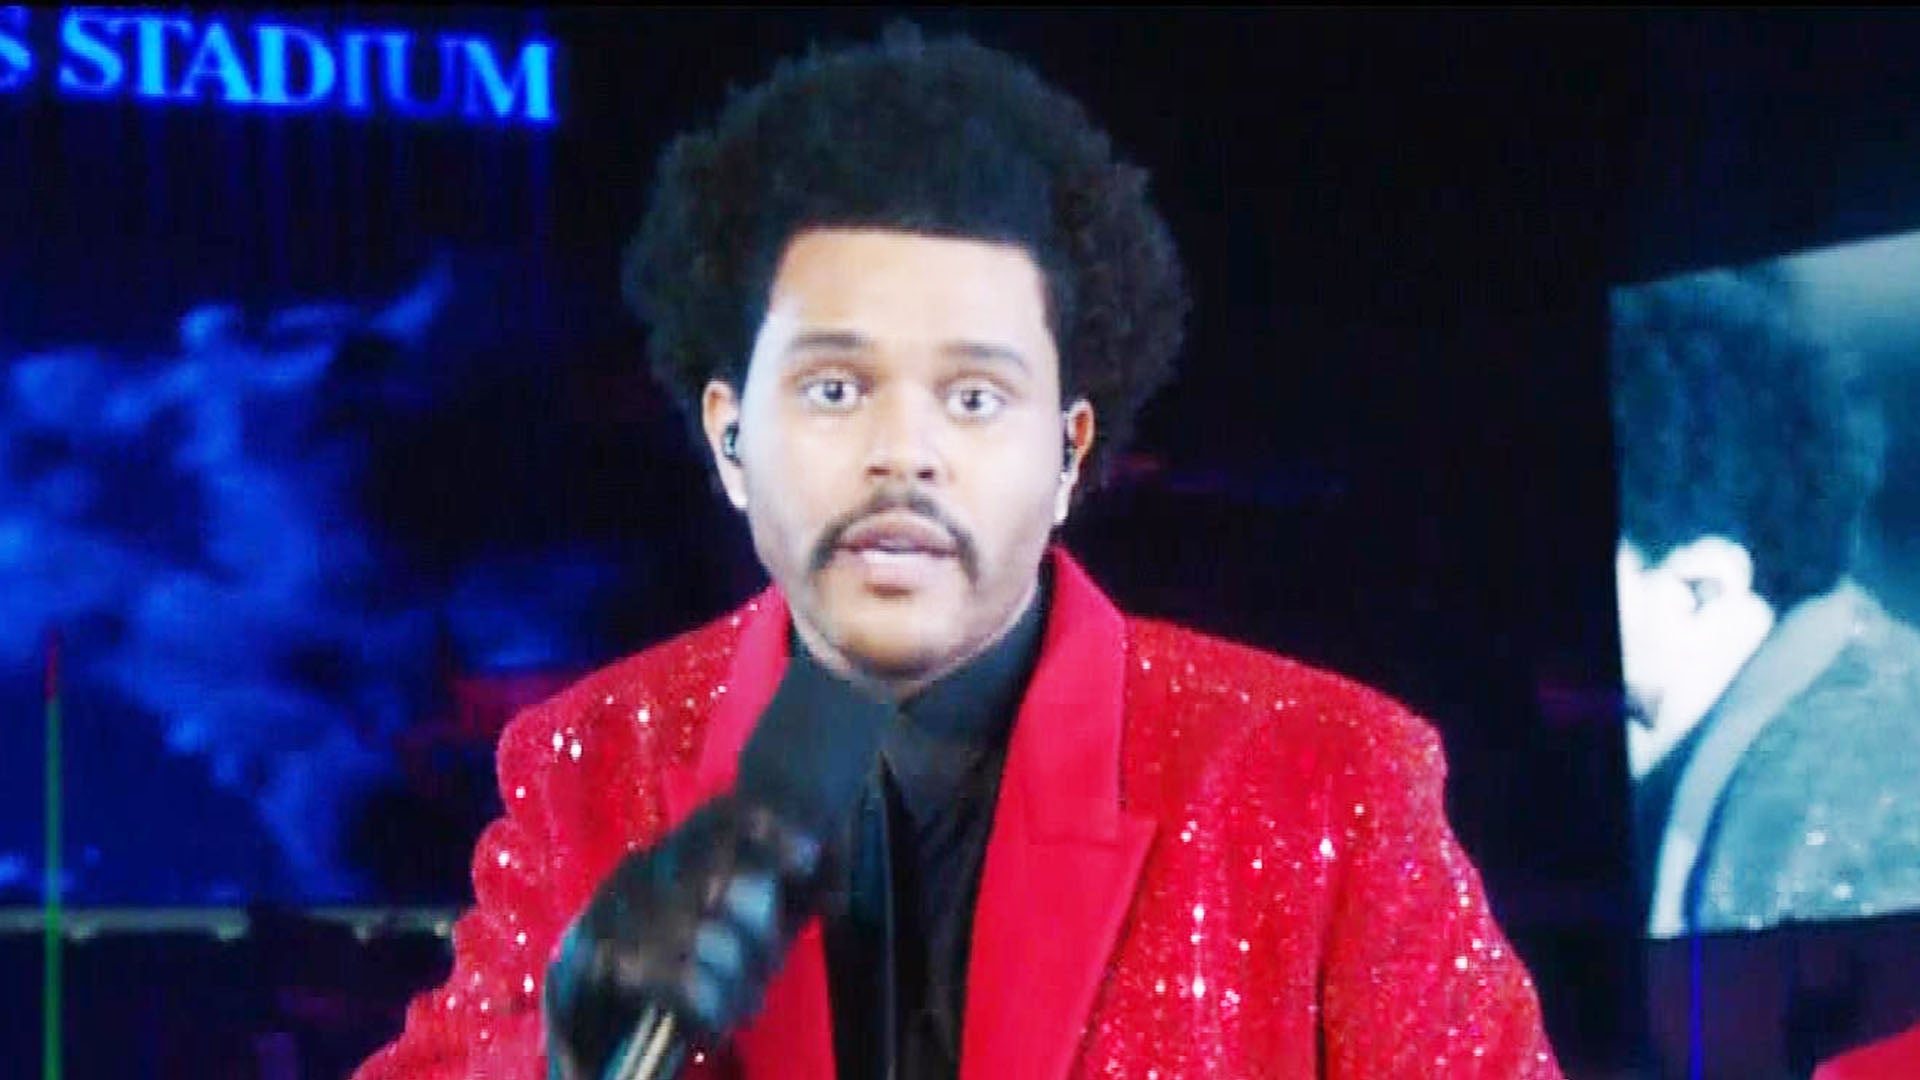 The Weeknd's red Super Bowl Givenchy jacket by was his most